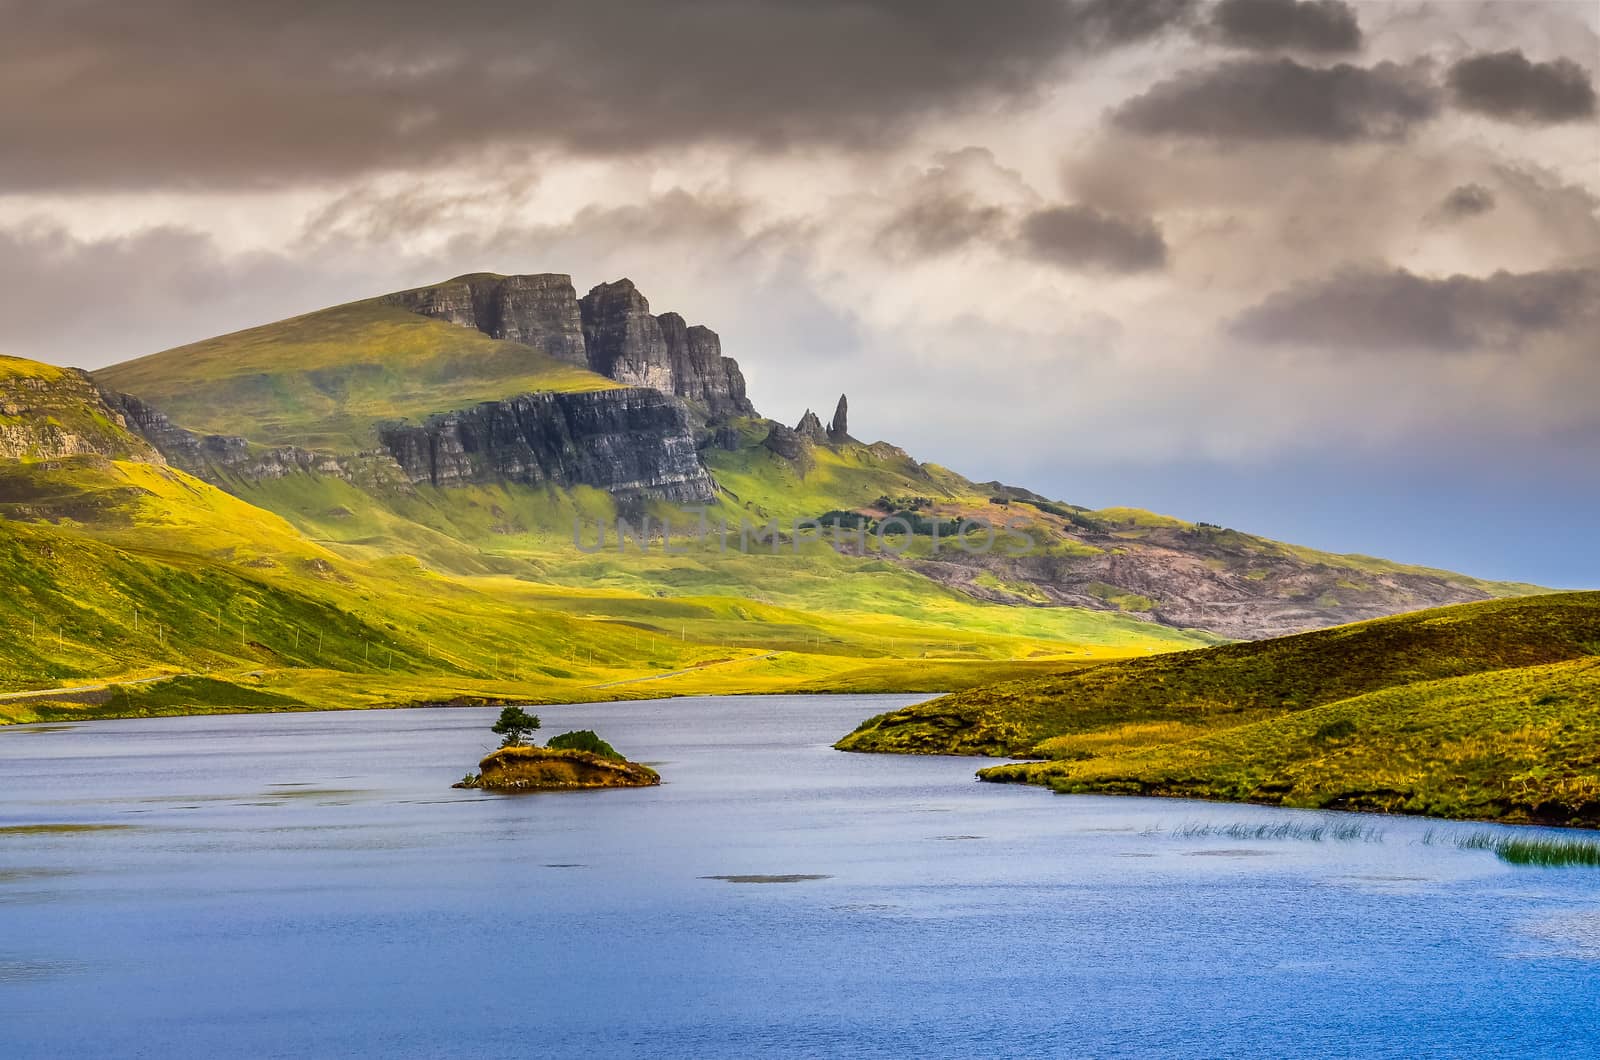 Landscape view of Old Man of Storr rock formation and lake, Scotland, United Kingdom